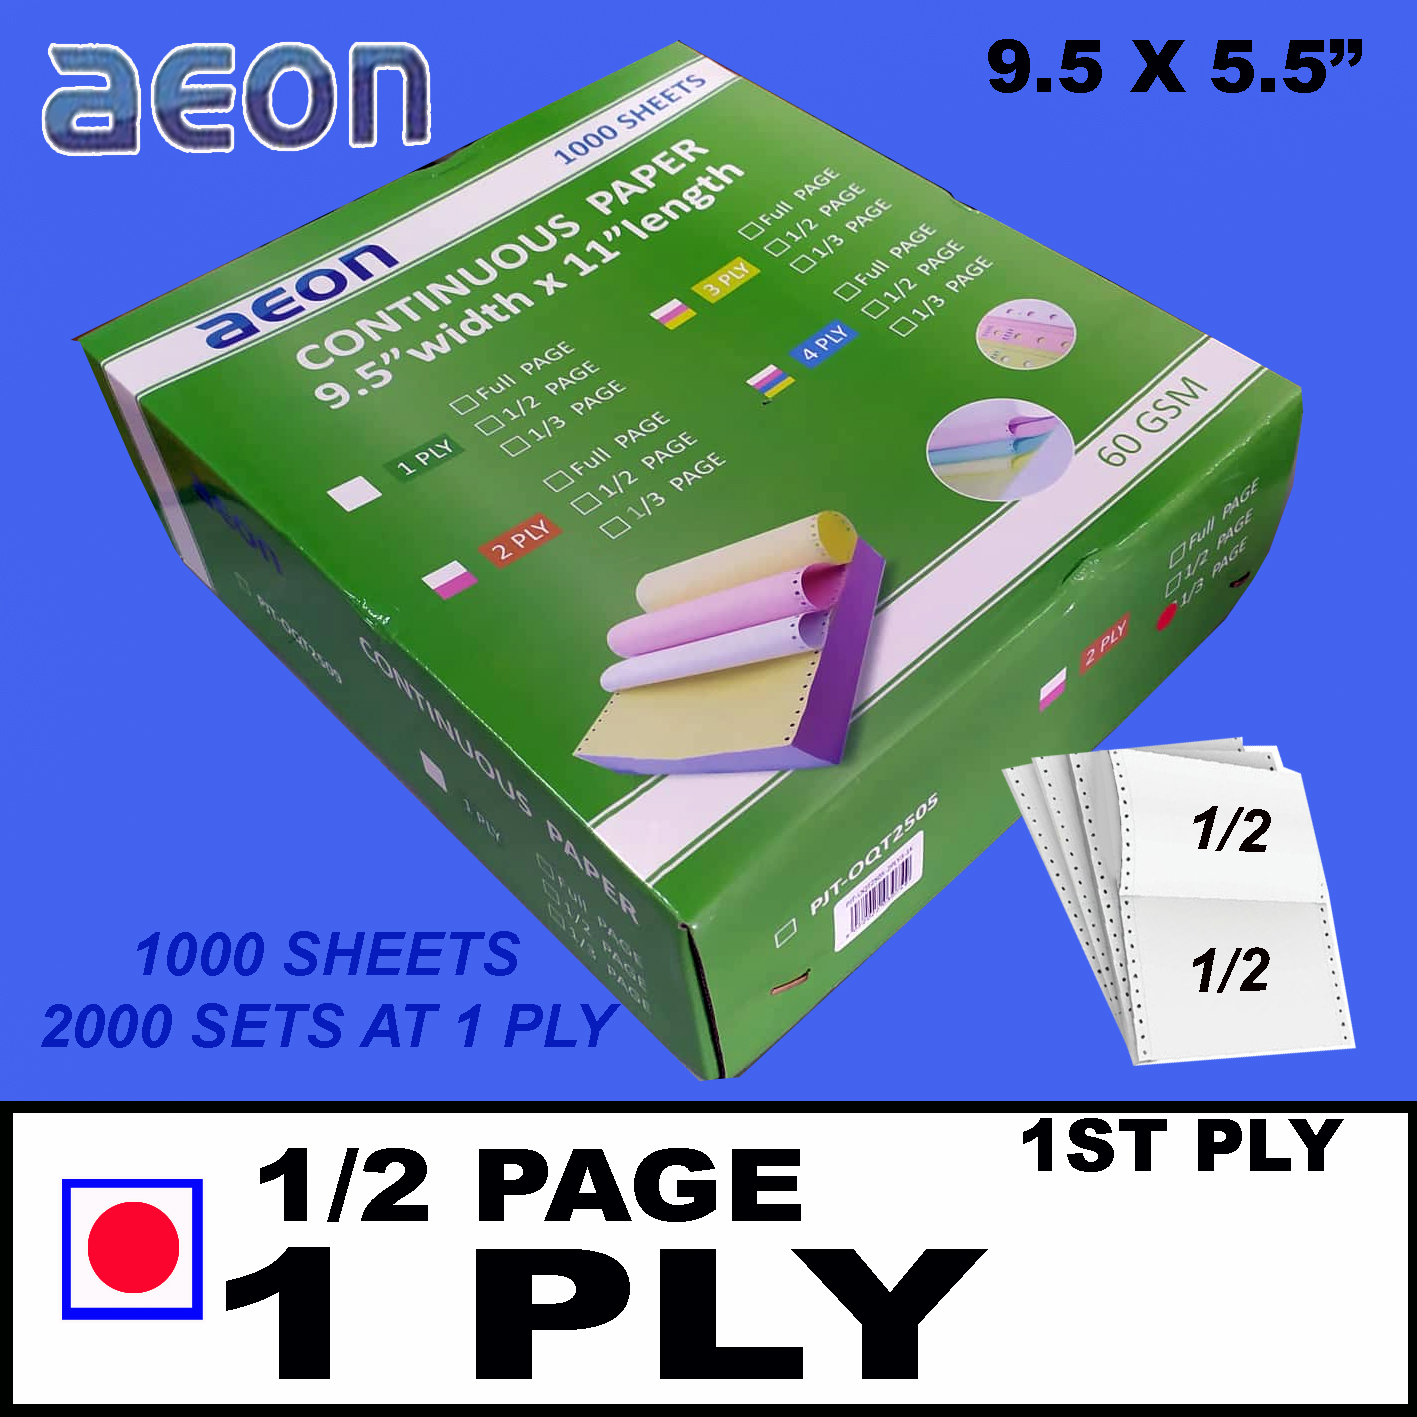 Aeon 1ply Carbonless Continuous Form Paper 1half 1000sheets 2000sets 9